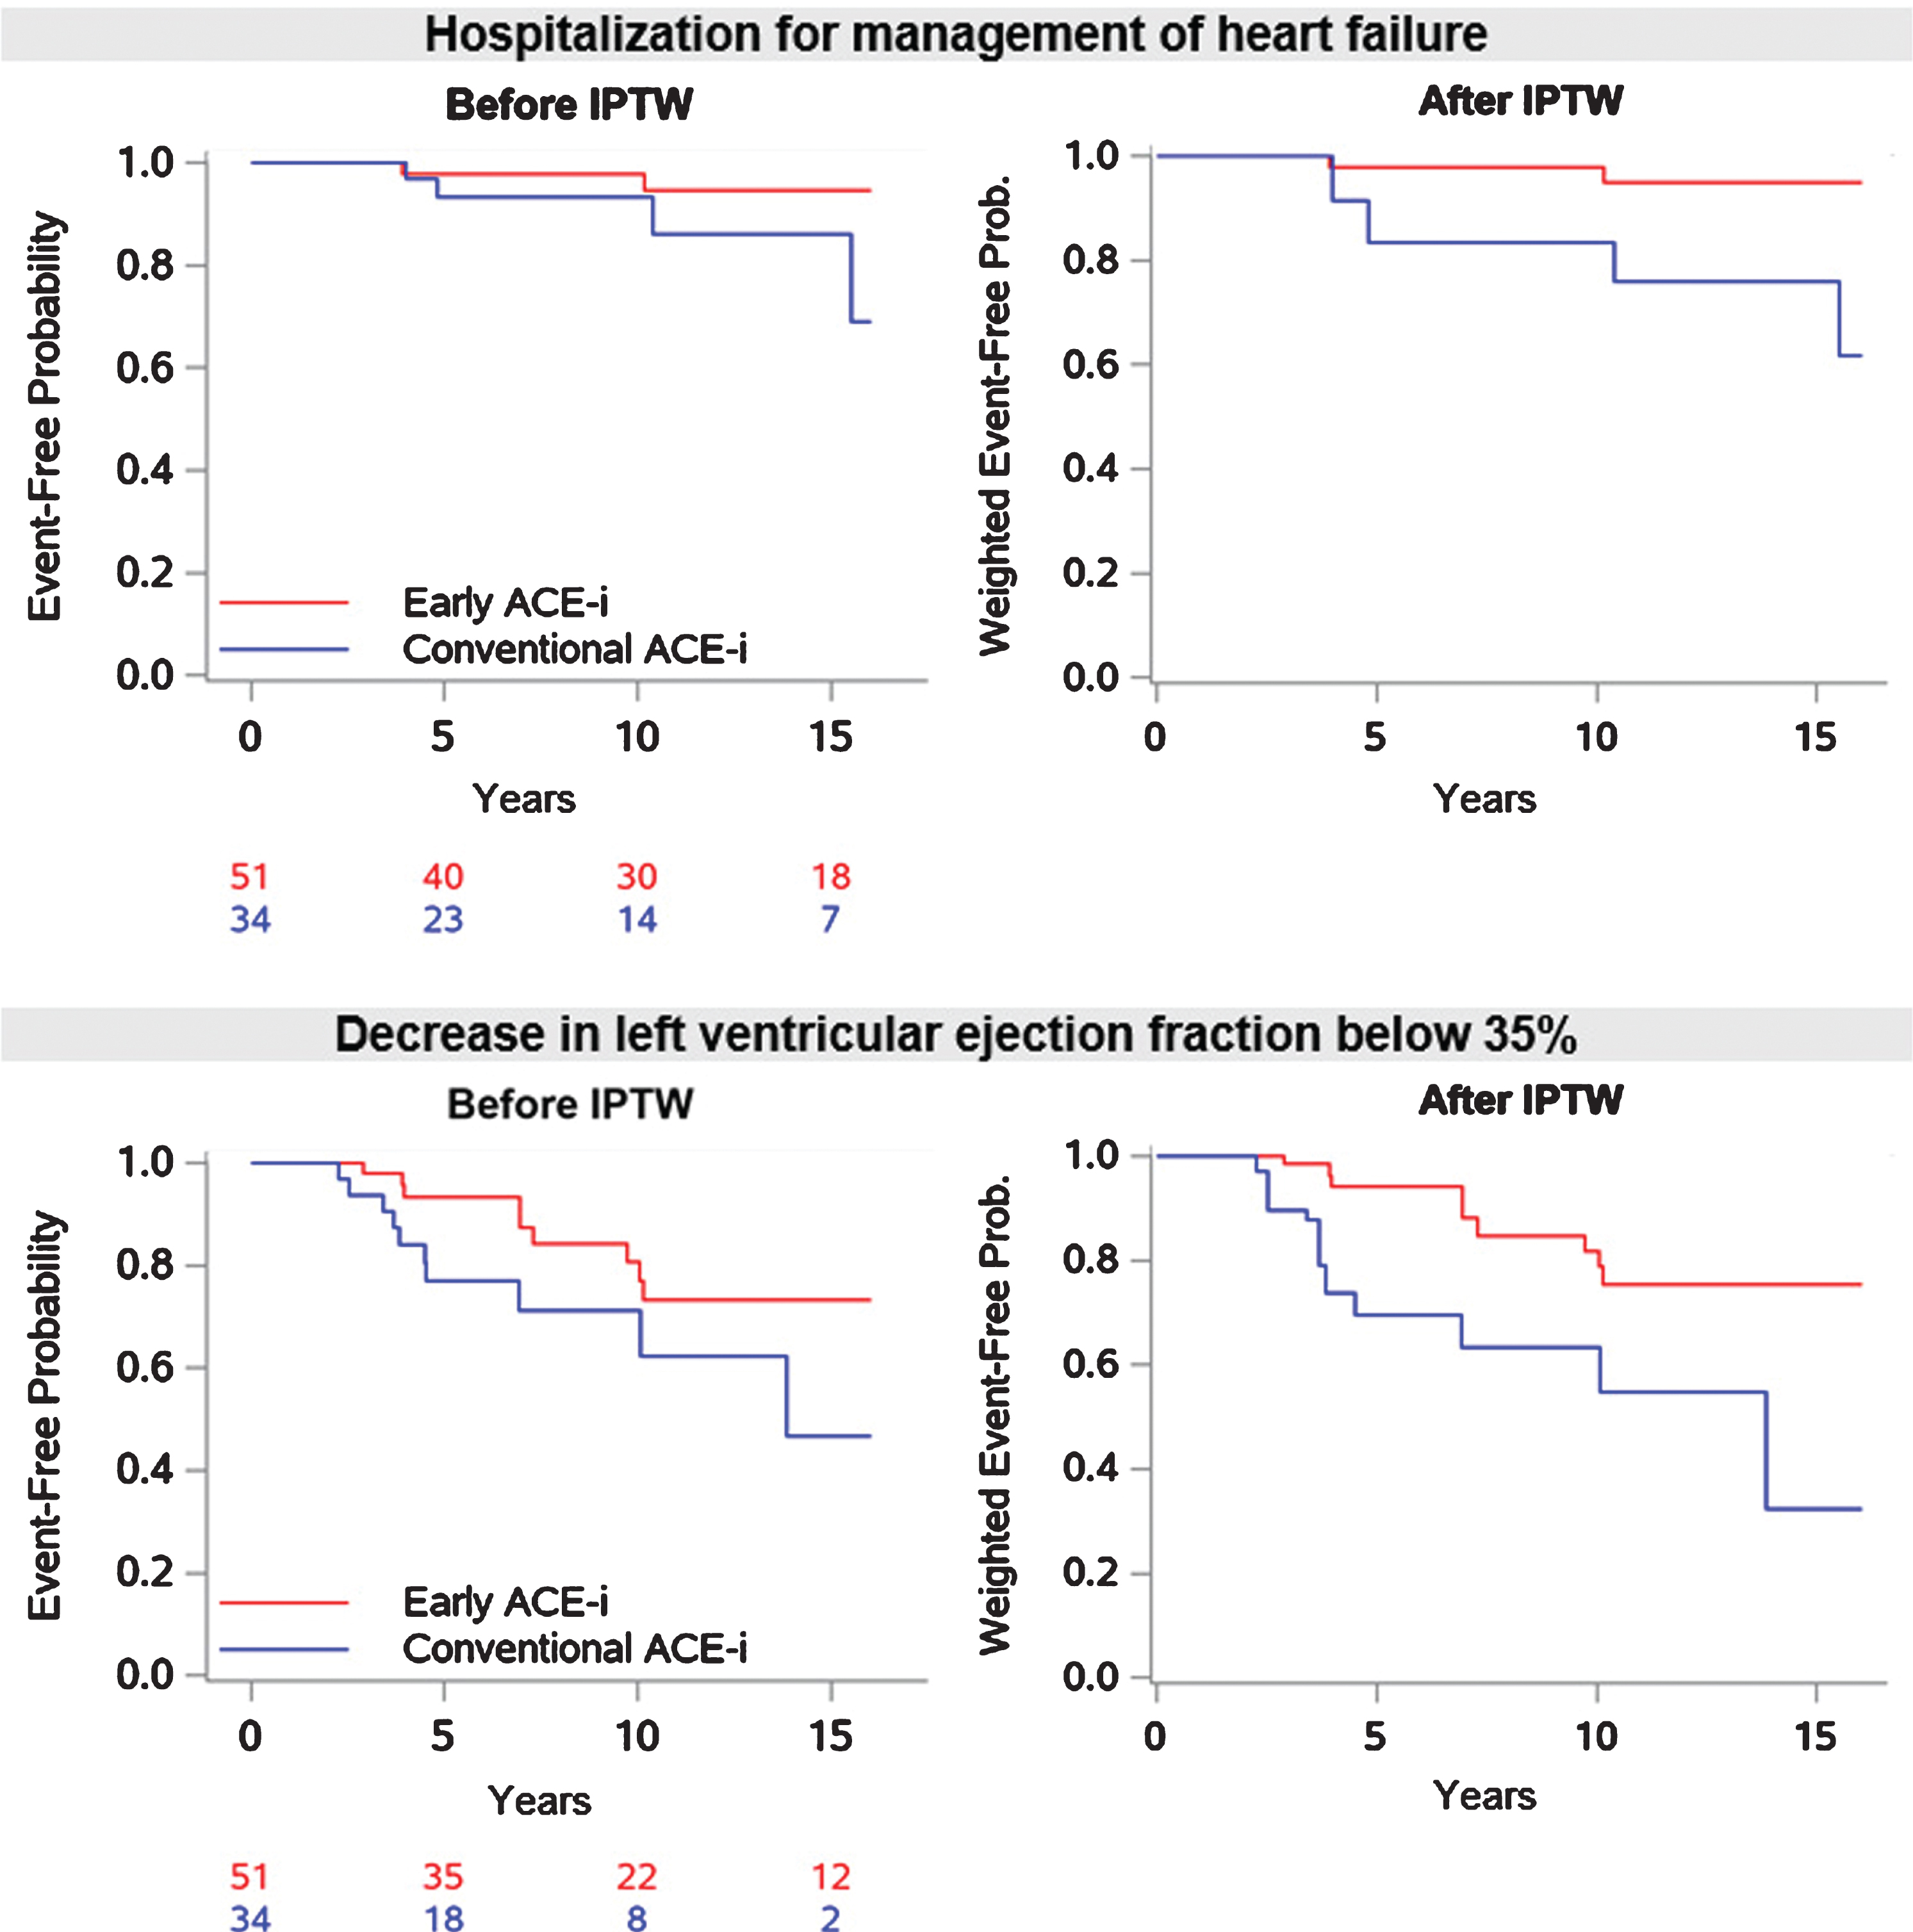 Hospitalization for management of heart failure and decrease in left ventricular ejection fraction to <35% during follow-up. IPTW = inverse probability of treatment weighting; ACE-i = angiotensin-converting enzyme inhibitor.